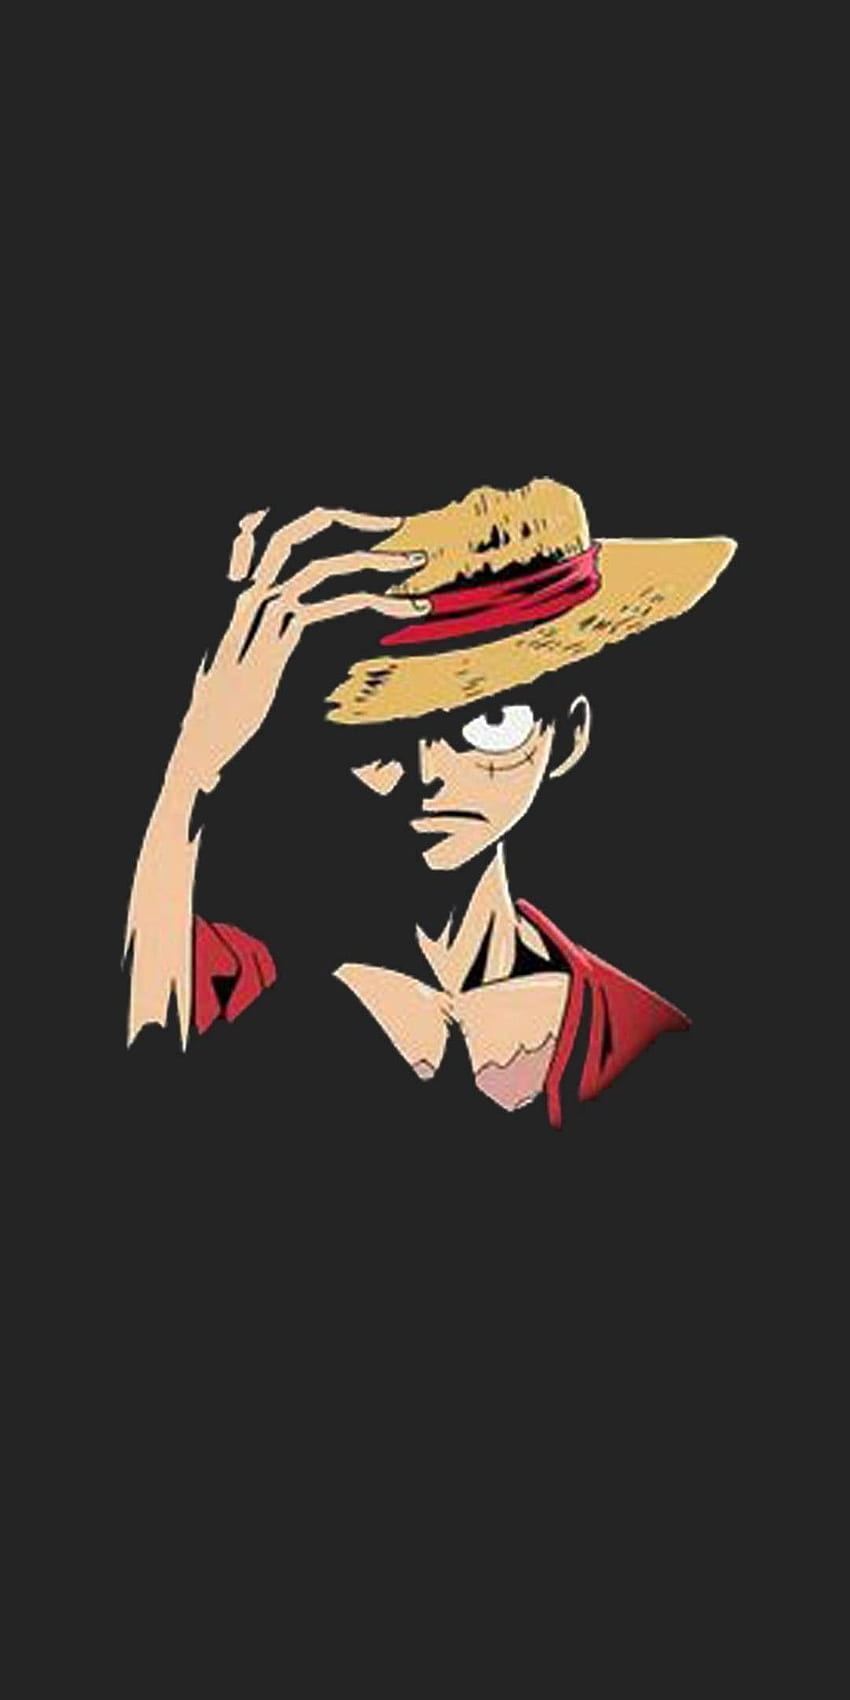 One Piece wallpapers for iPhone in 2023 (Free 4k download) - iGeeksBlog